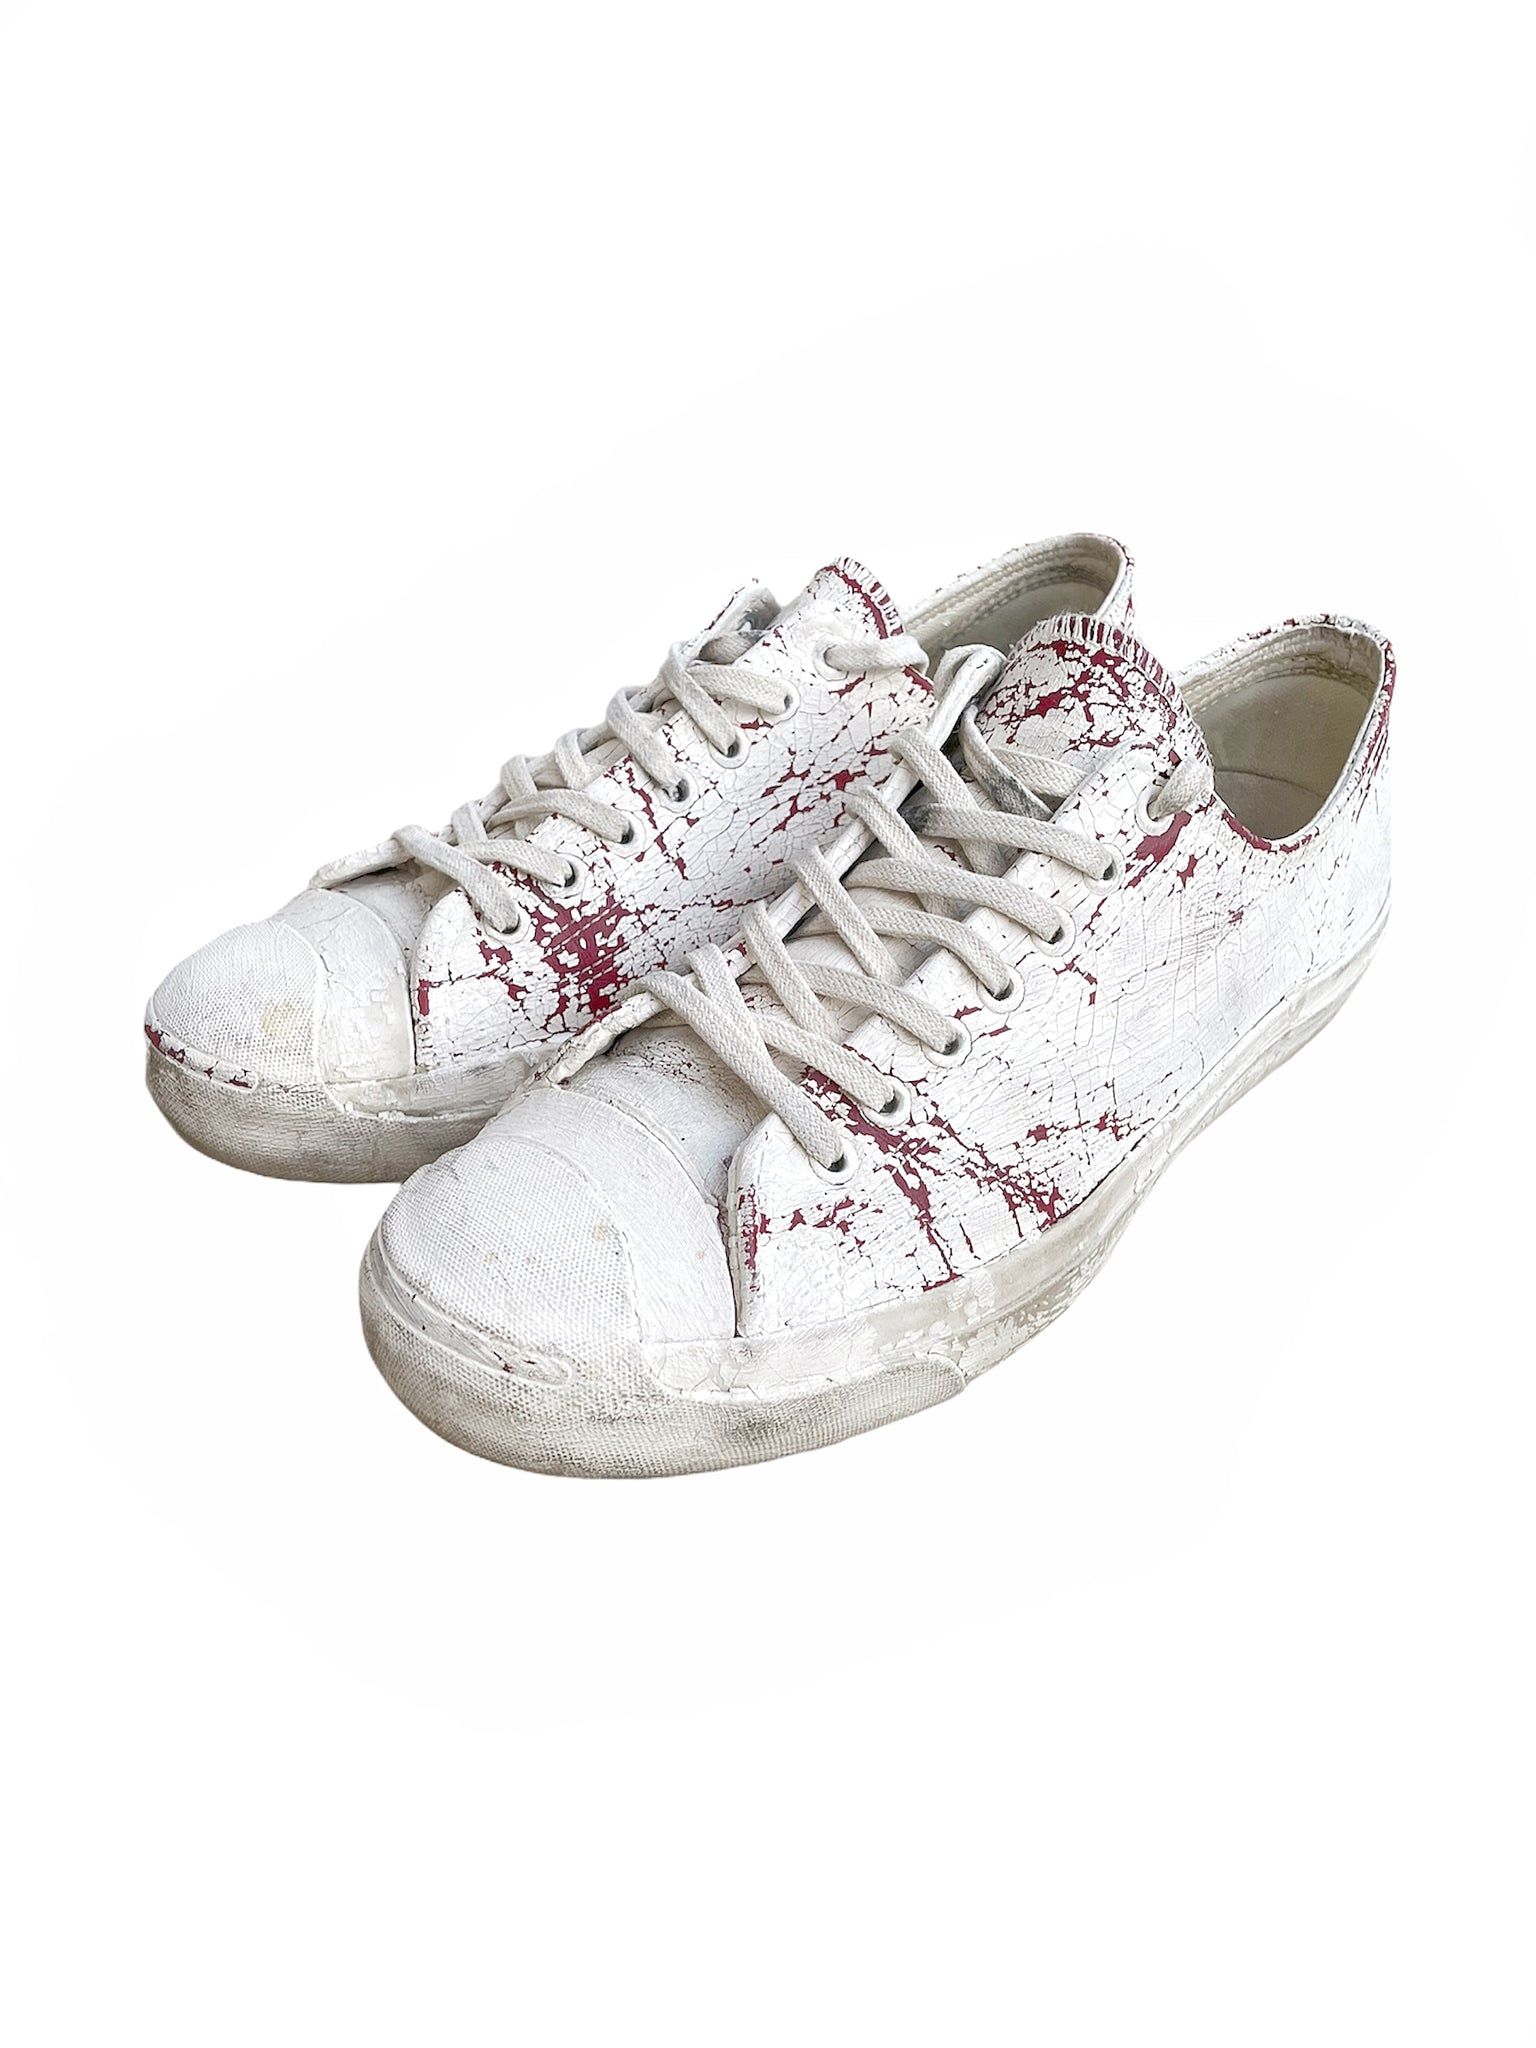 2014 Painted Distressing Jack Purcell Converse